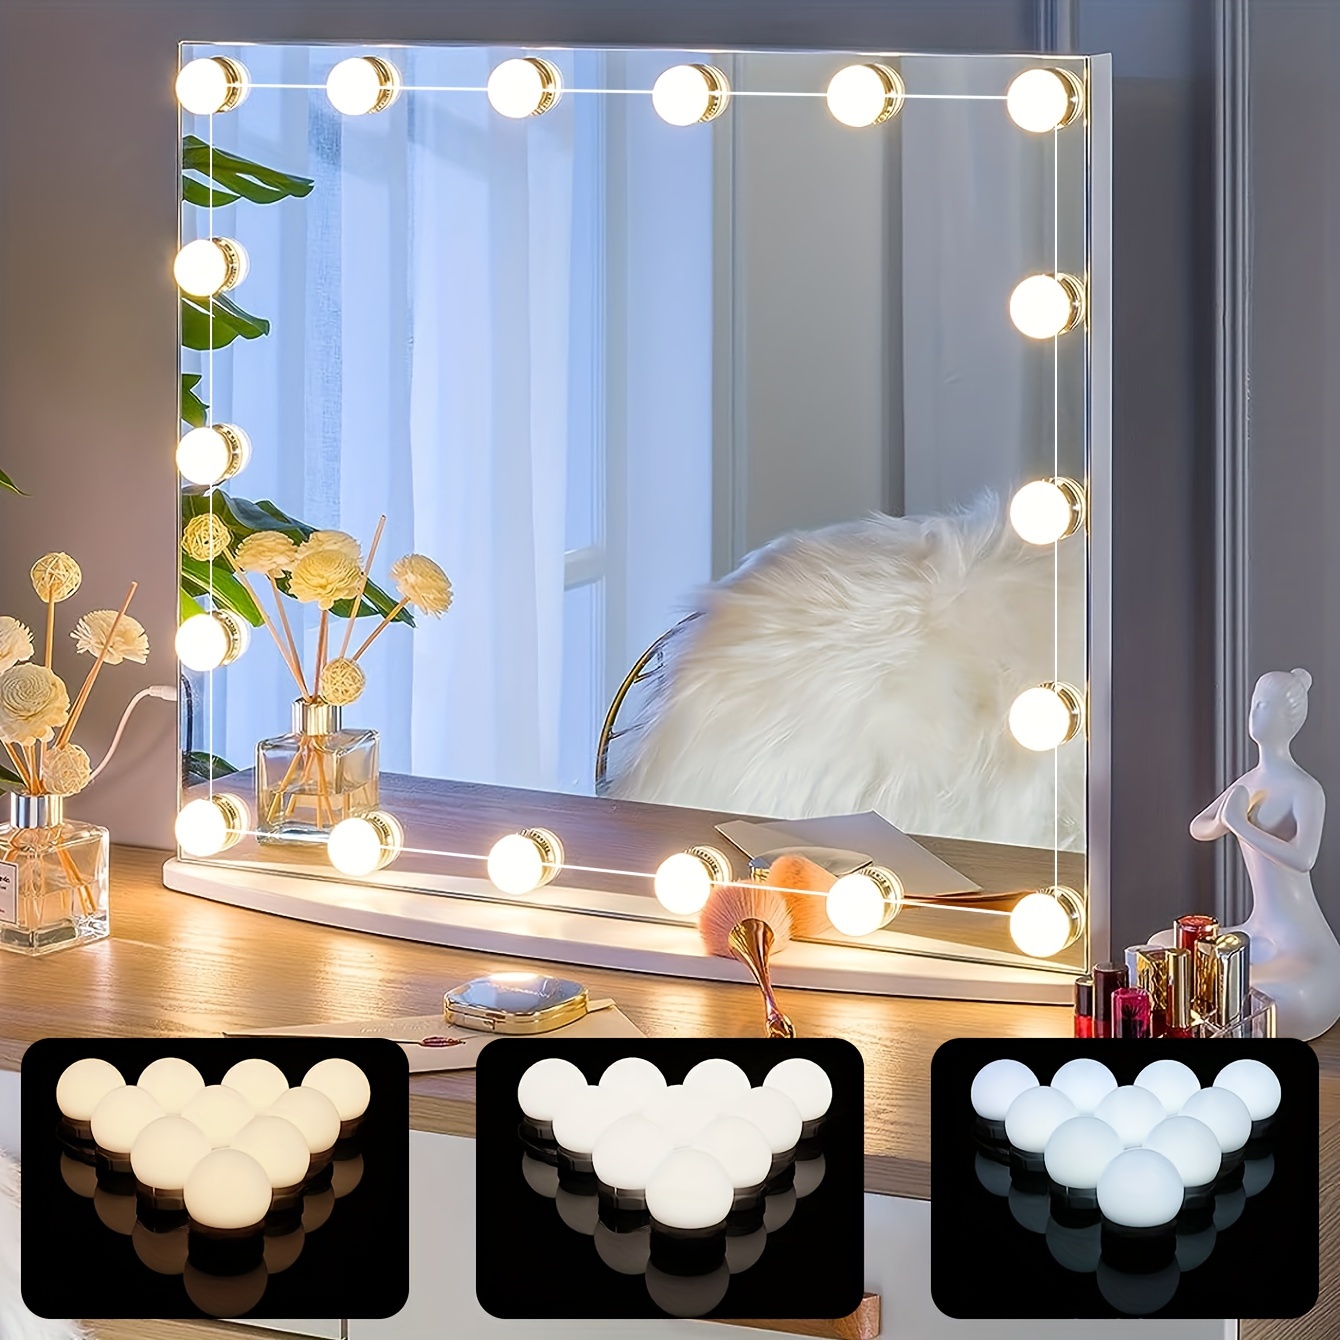 

Led Mirror Makeup Light, Makeup Light, Optional 4/10/10/14pcs Adjustable Bulbs, Color And Brightness Adjustable, Usb Cable, Mirror Light For Vanity Makeup Room (mirror Not Included)